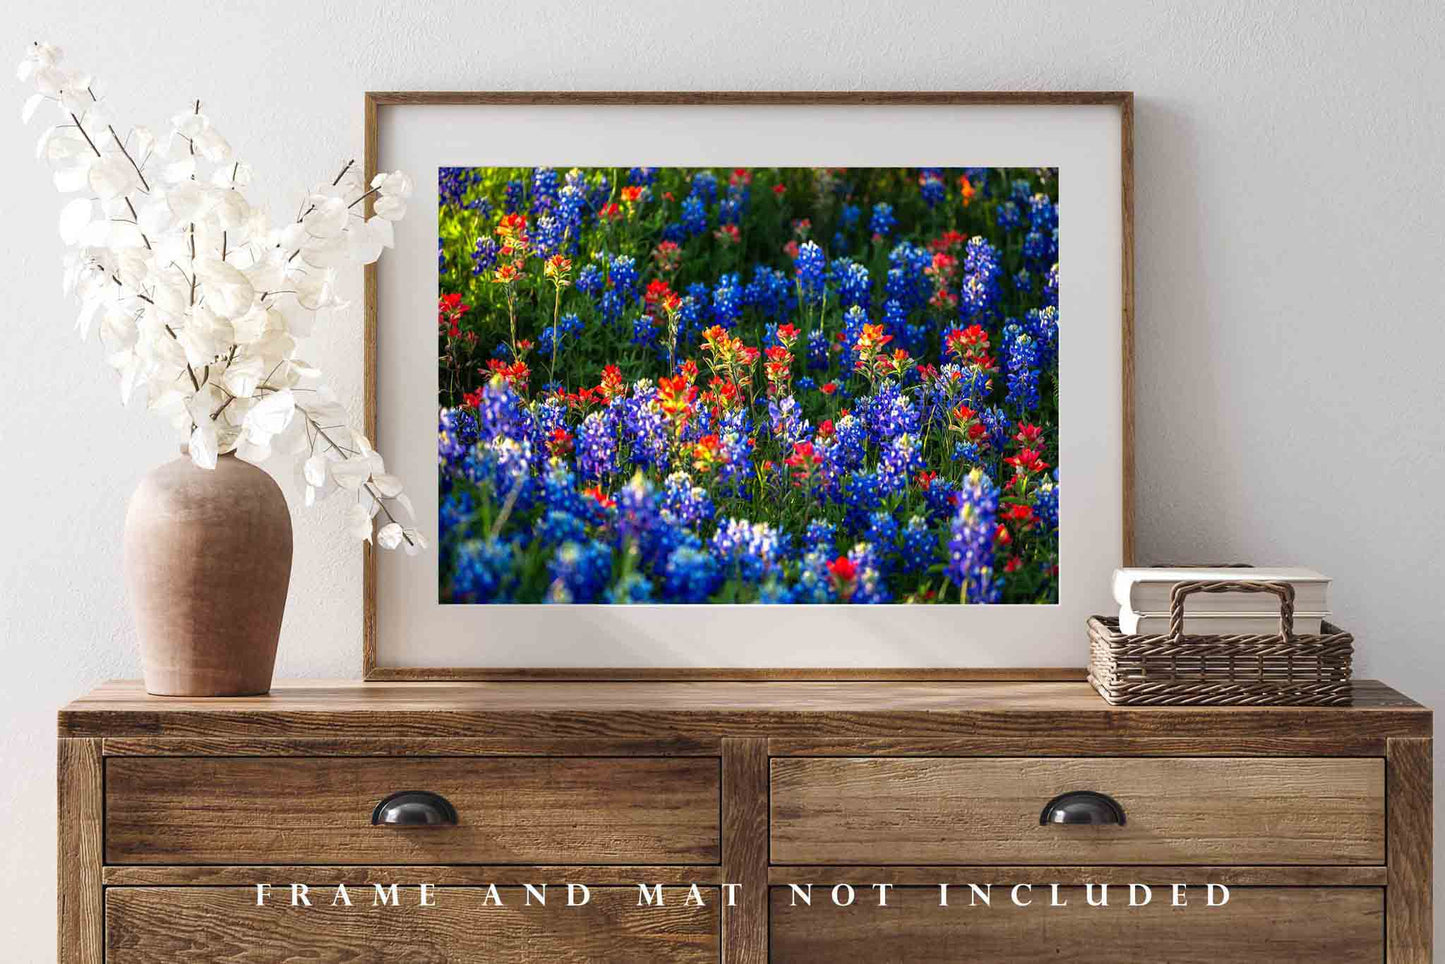 Wildflower Photography Print (Not Framed) Picture of Bluebonnets and Indian Paintbrush in Texas Flower Wall Art Floral Decor